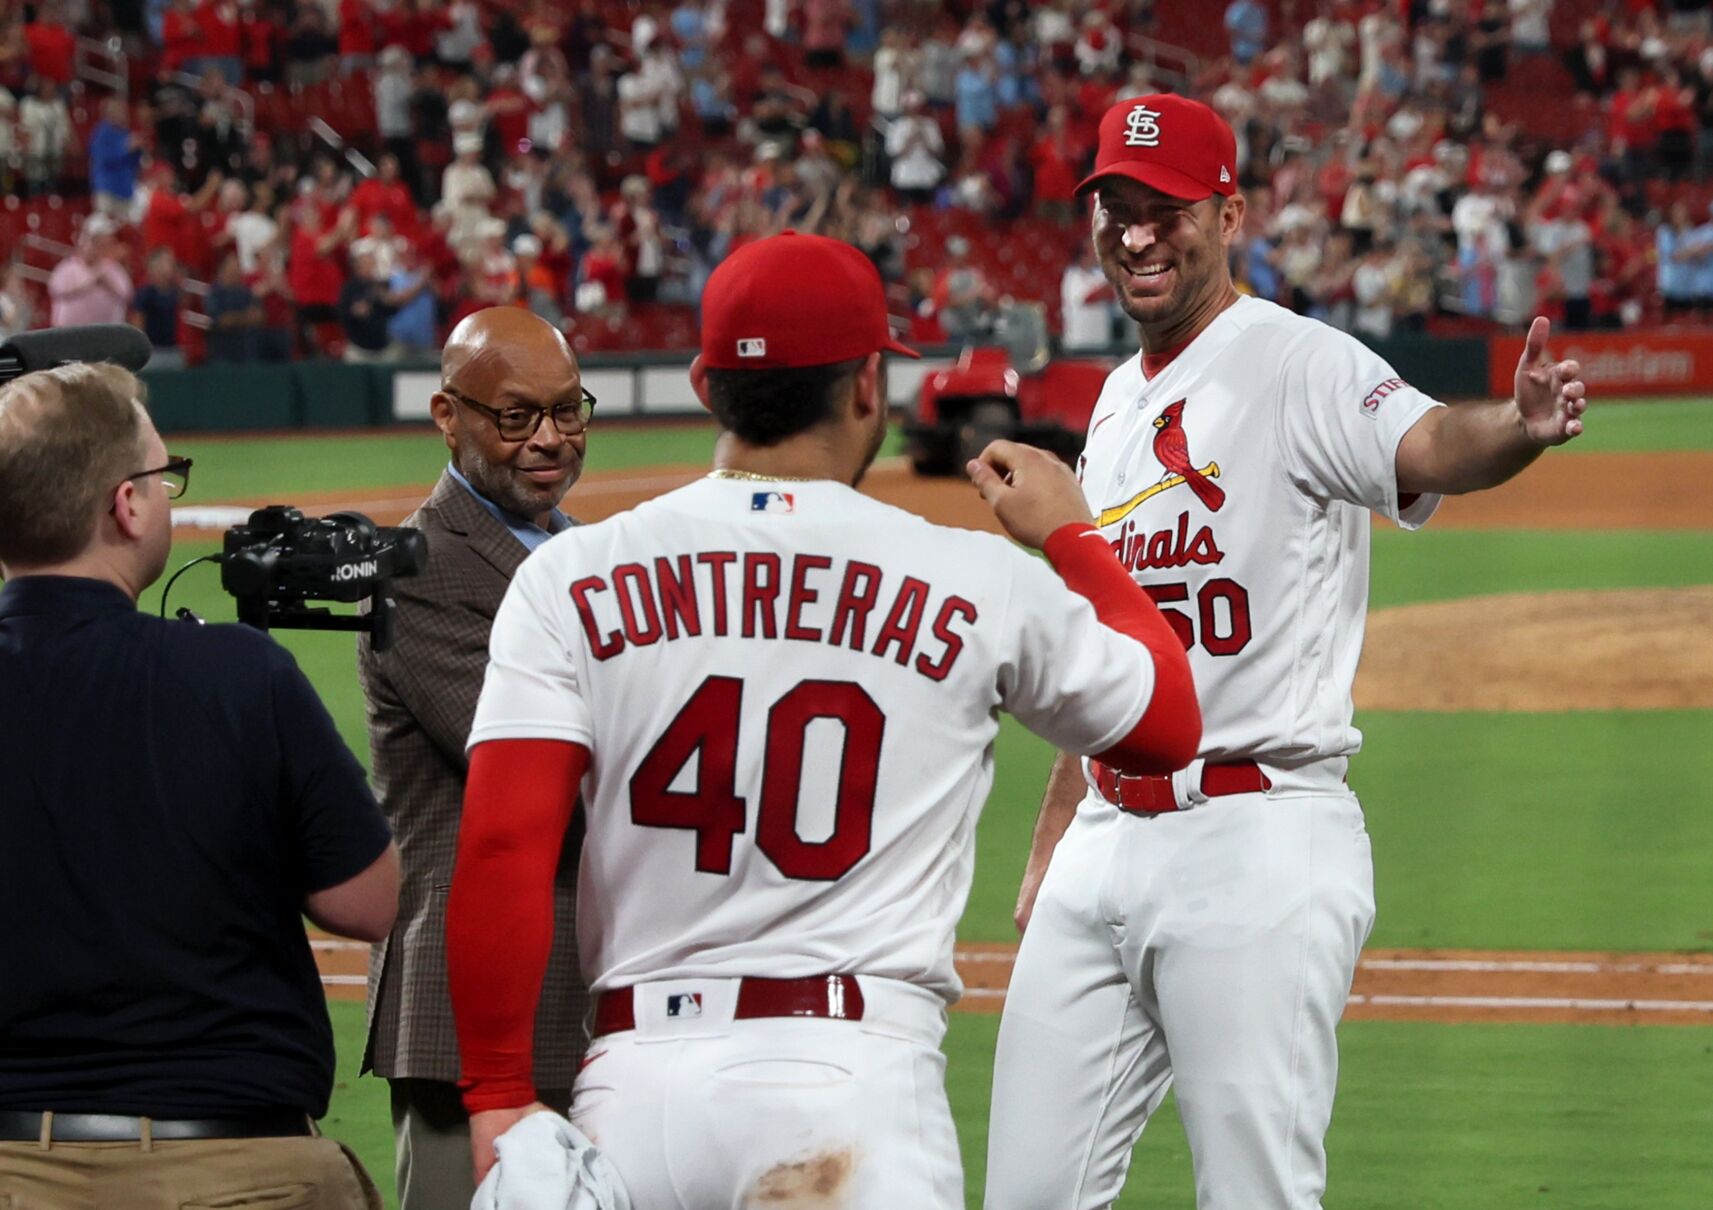 Adam Wainwrights last weekend in majors includes prep for concert, at-bat Cardinals Extra